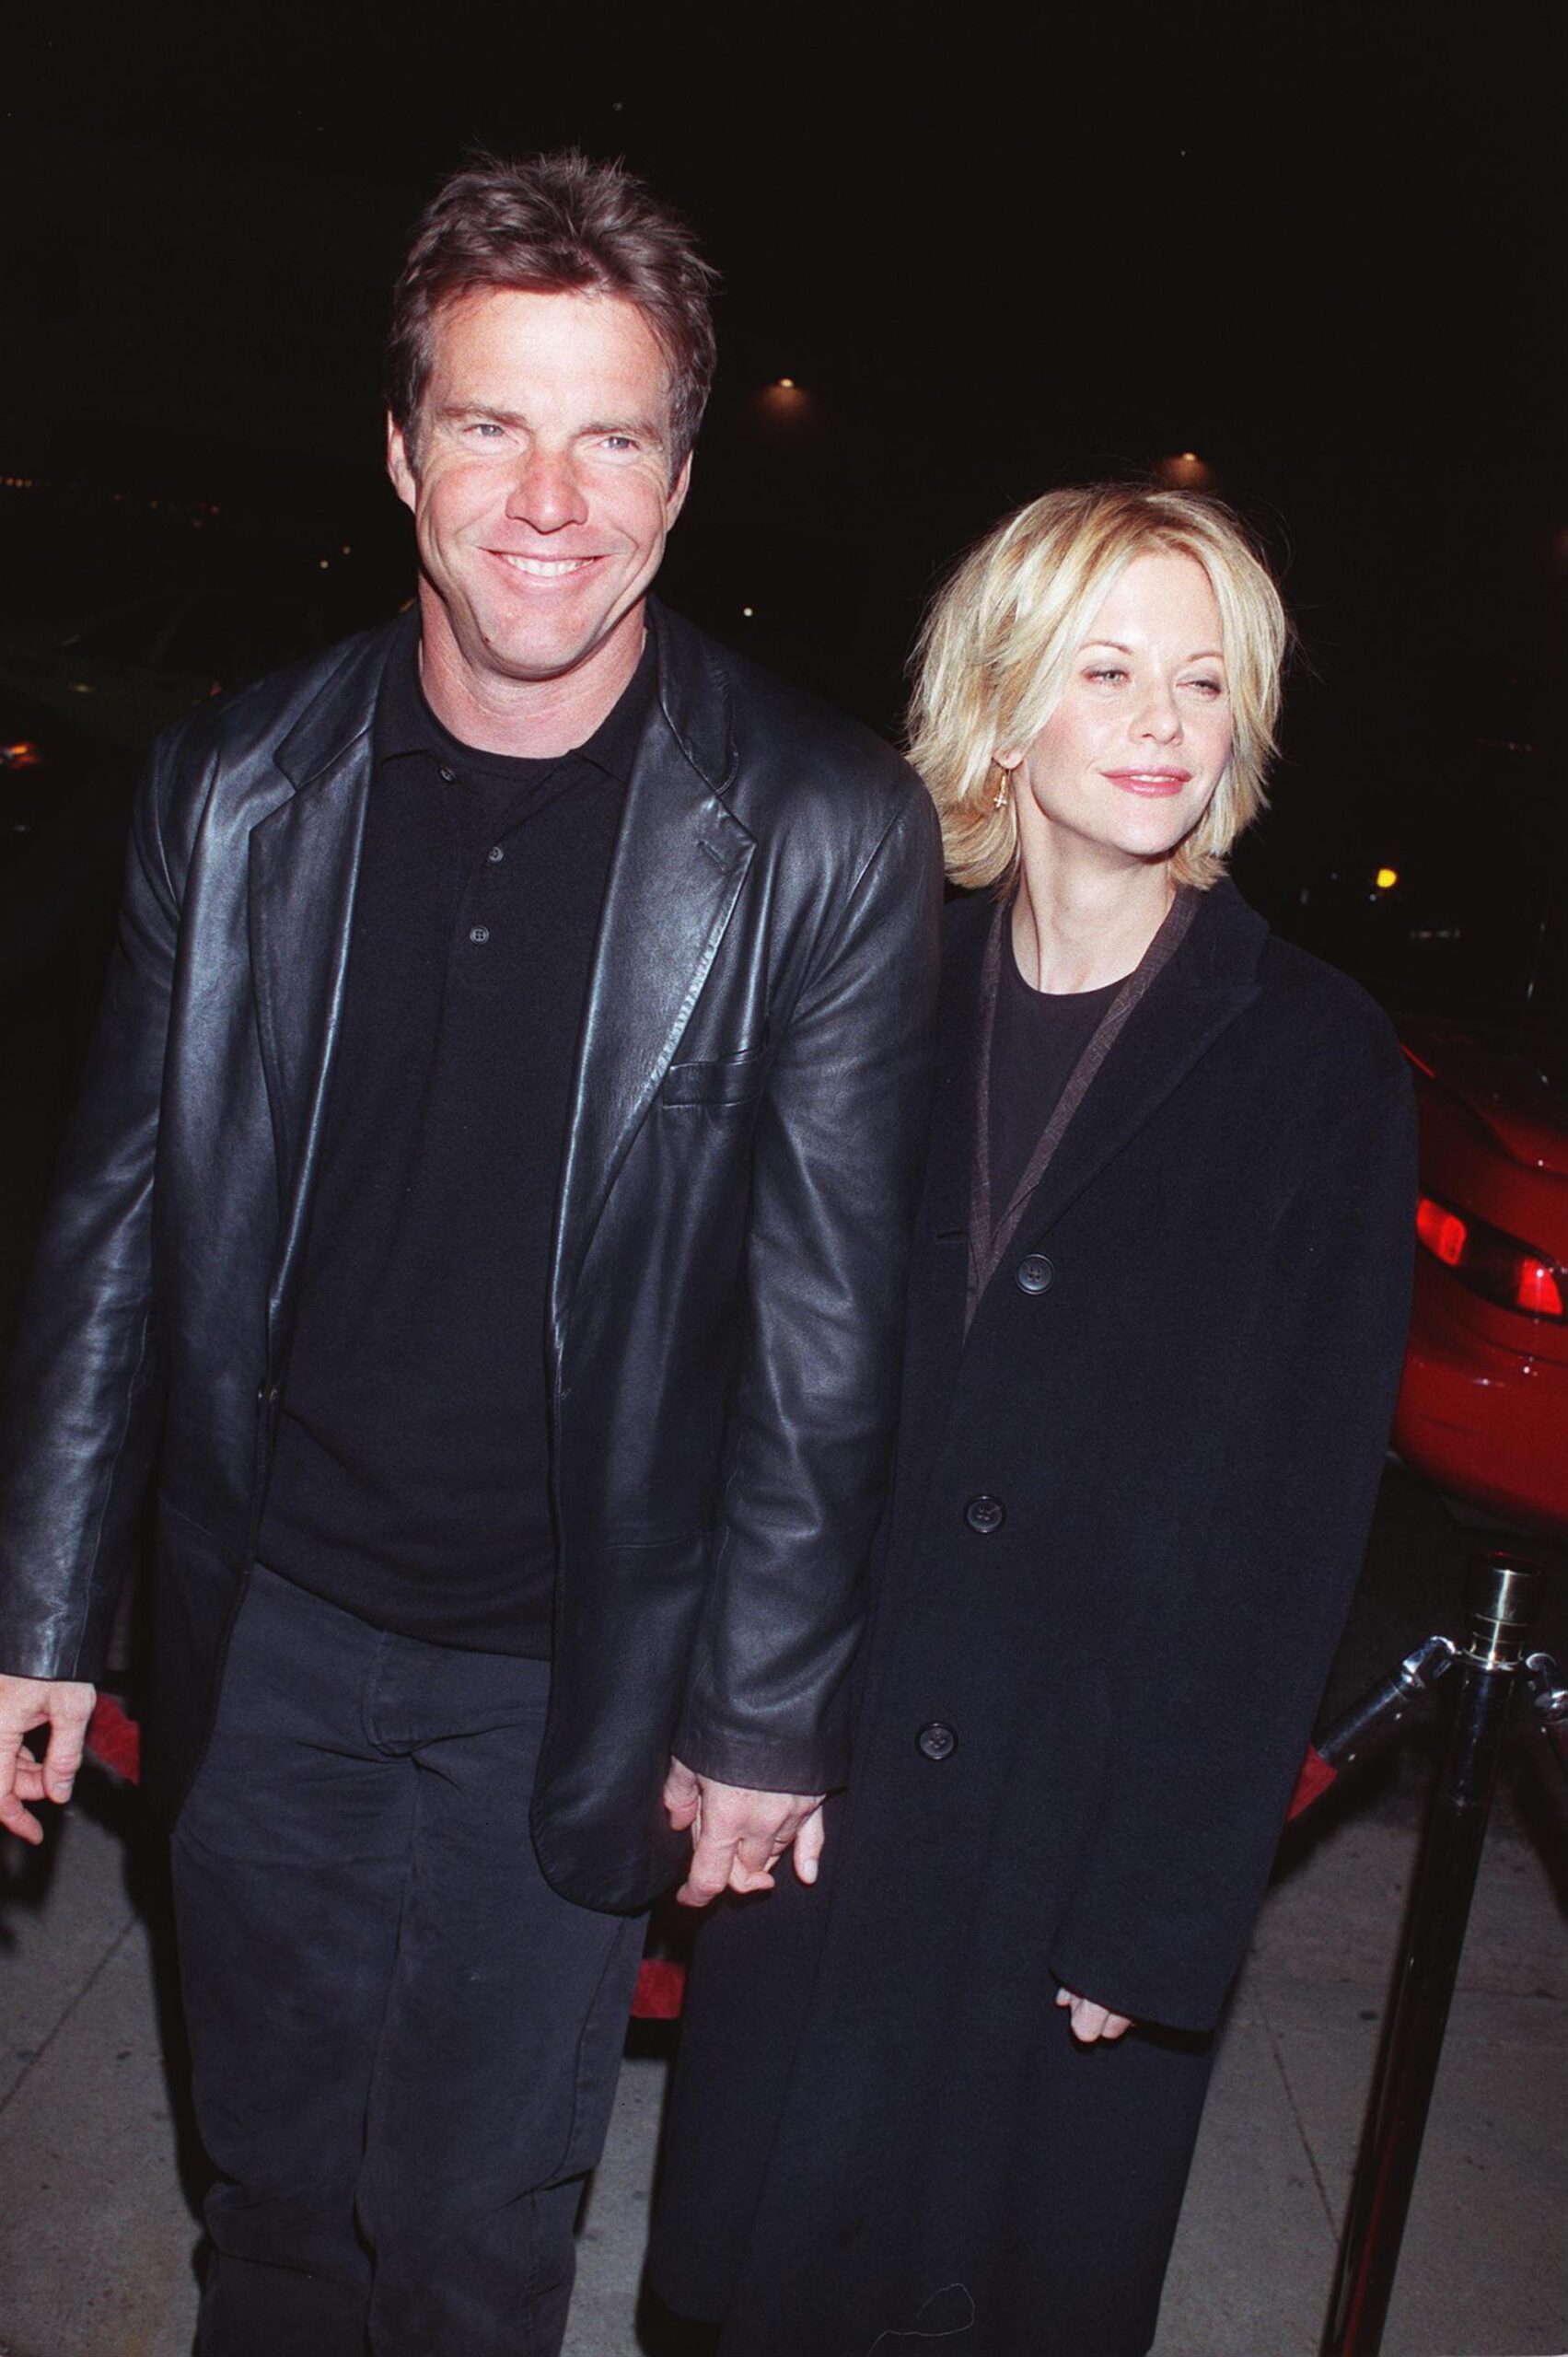 Actor Dennis Quaid and Meg Ryan on December 21, 1998, in Los Angeles, California | Source: Getty Images